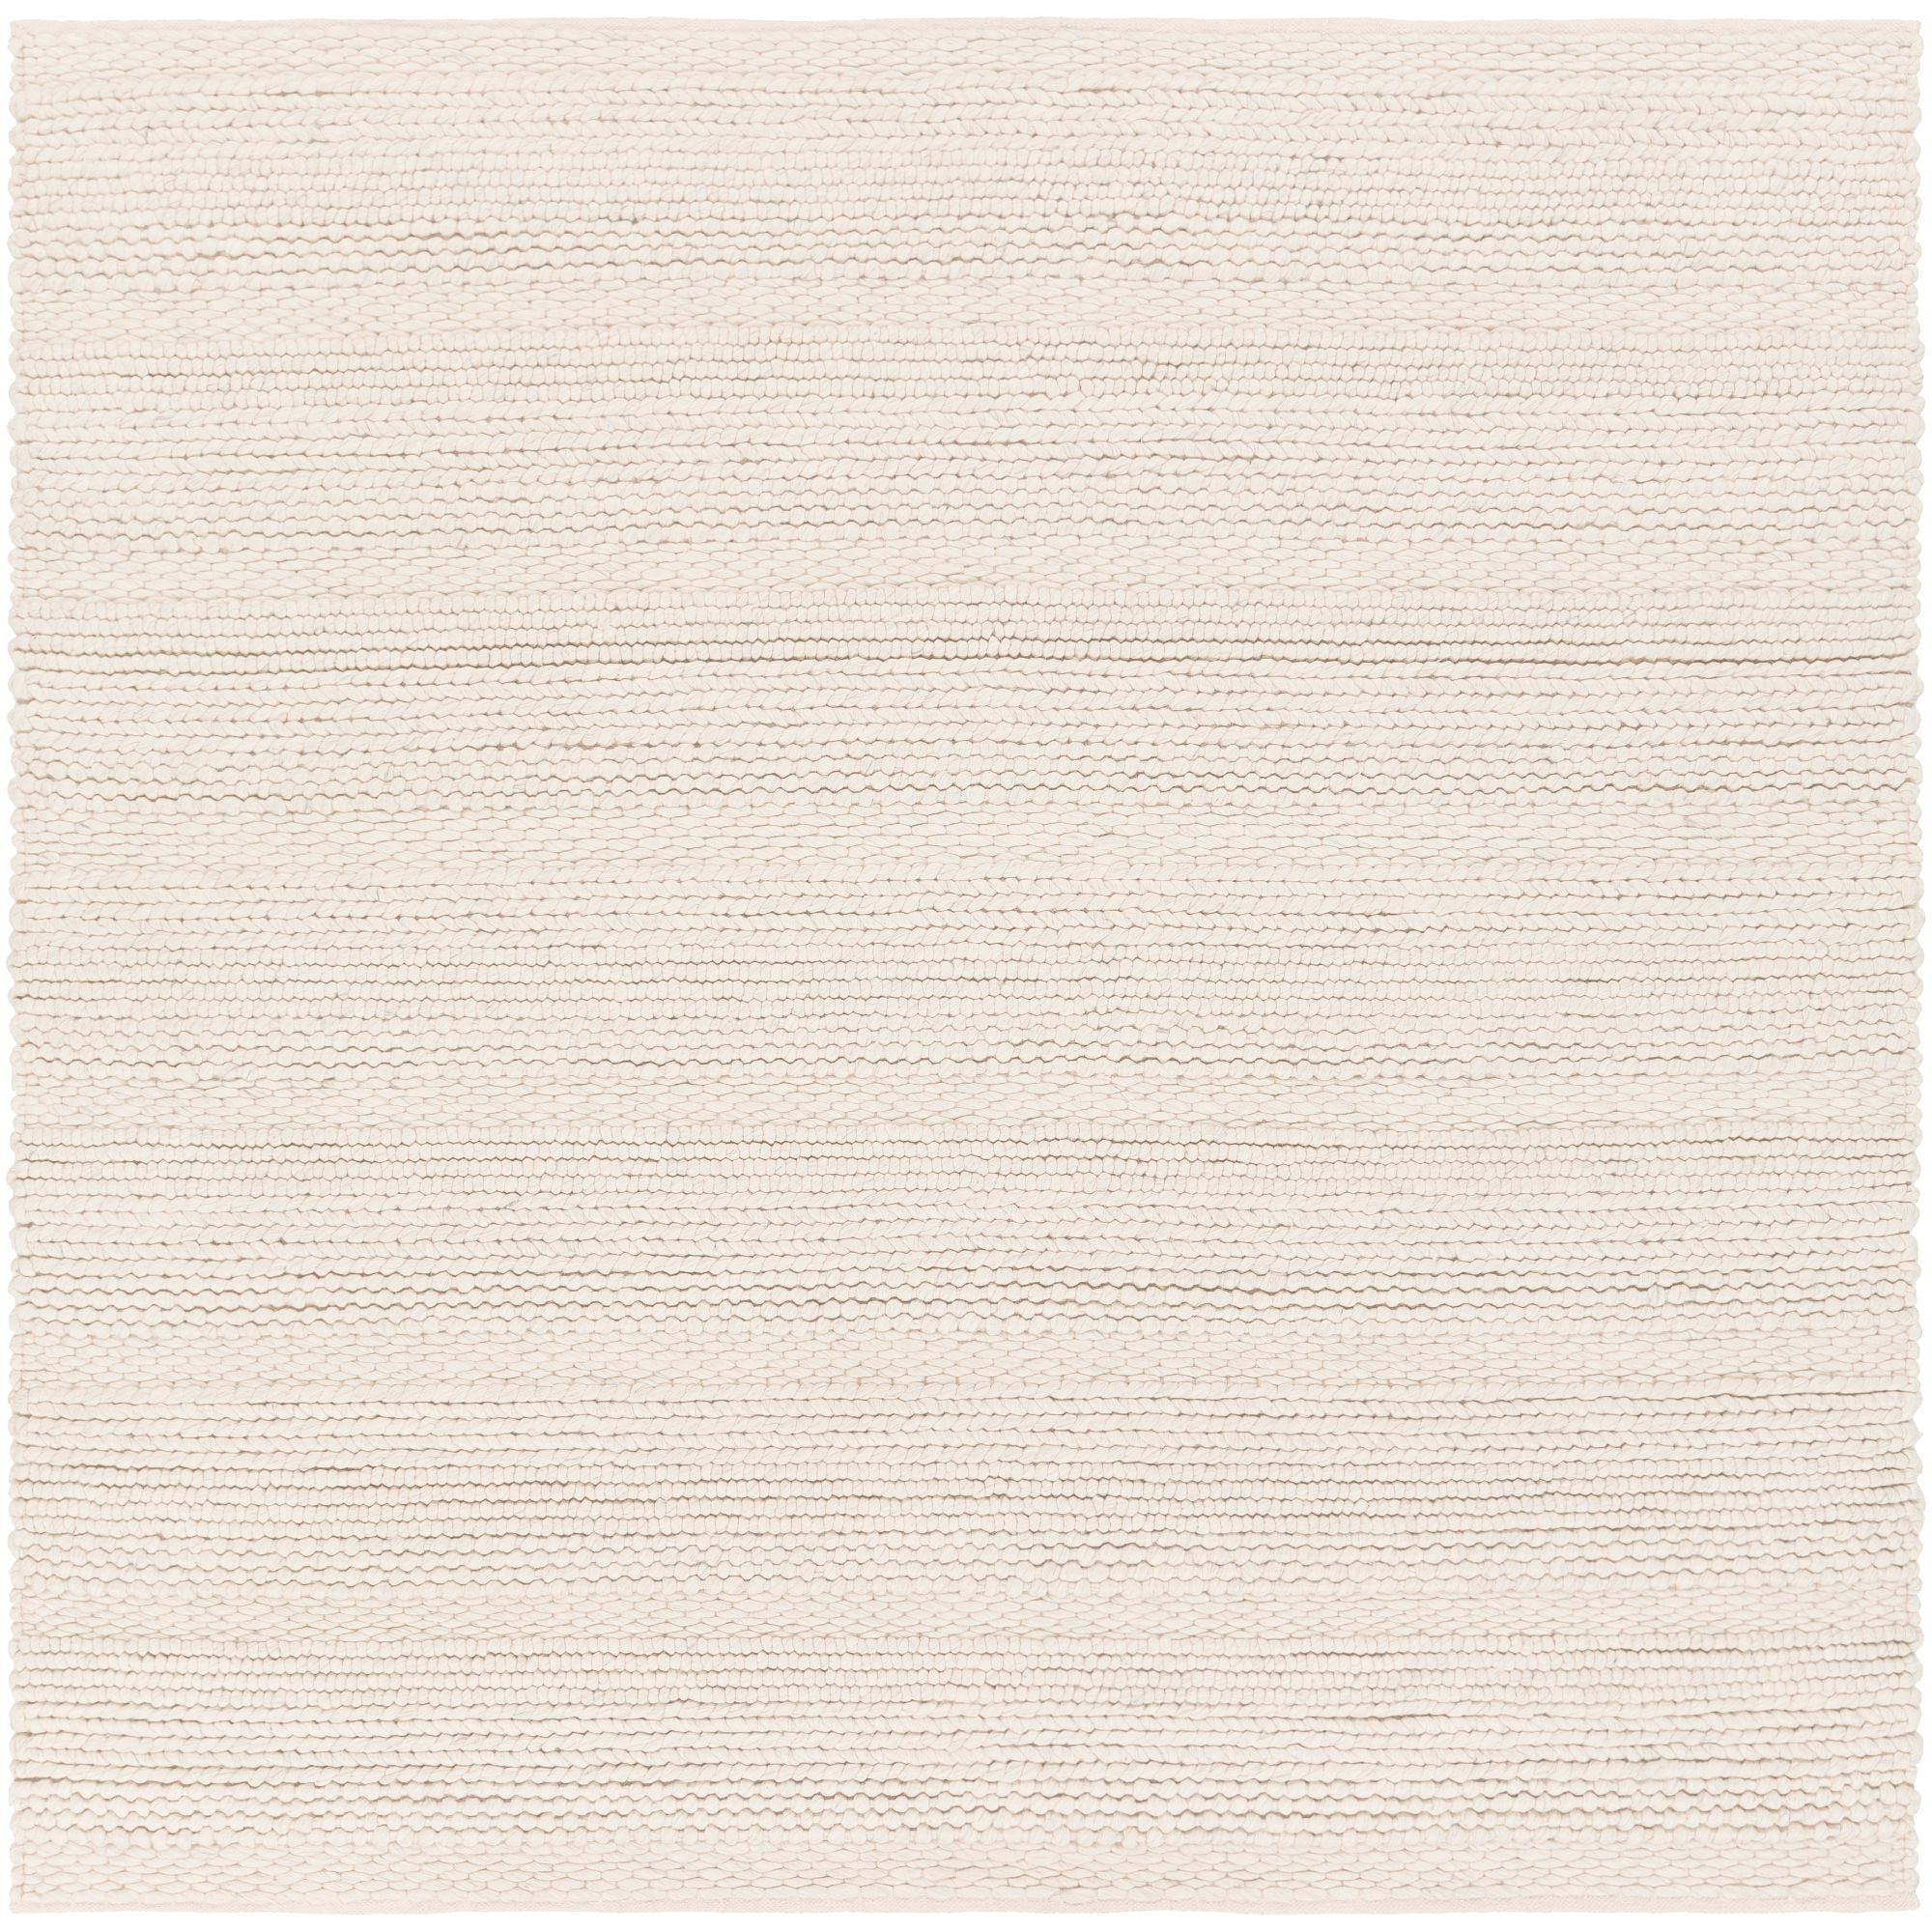 8 X Solid Ivory Square Area Throw, 8 X 8 Rug Square